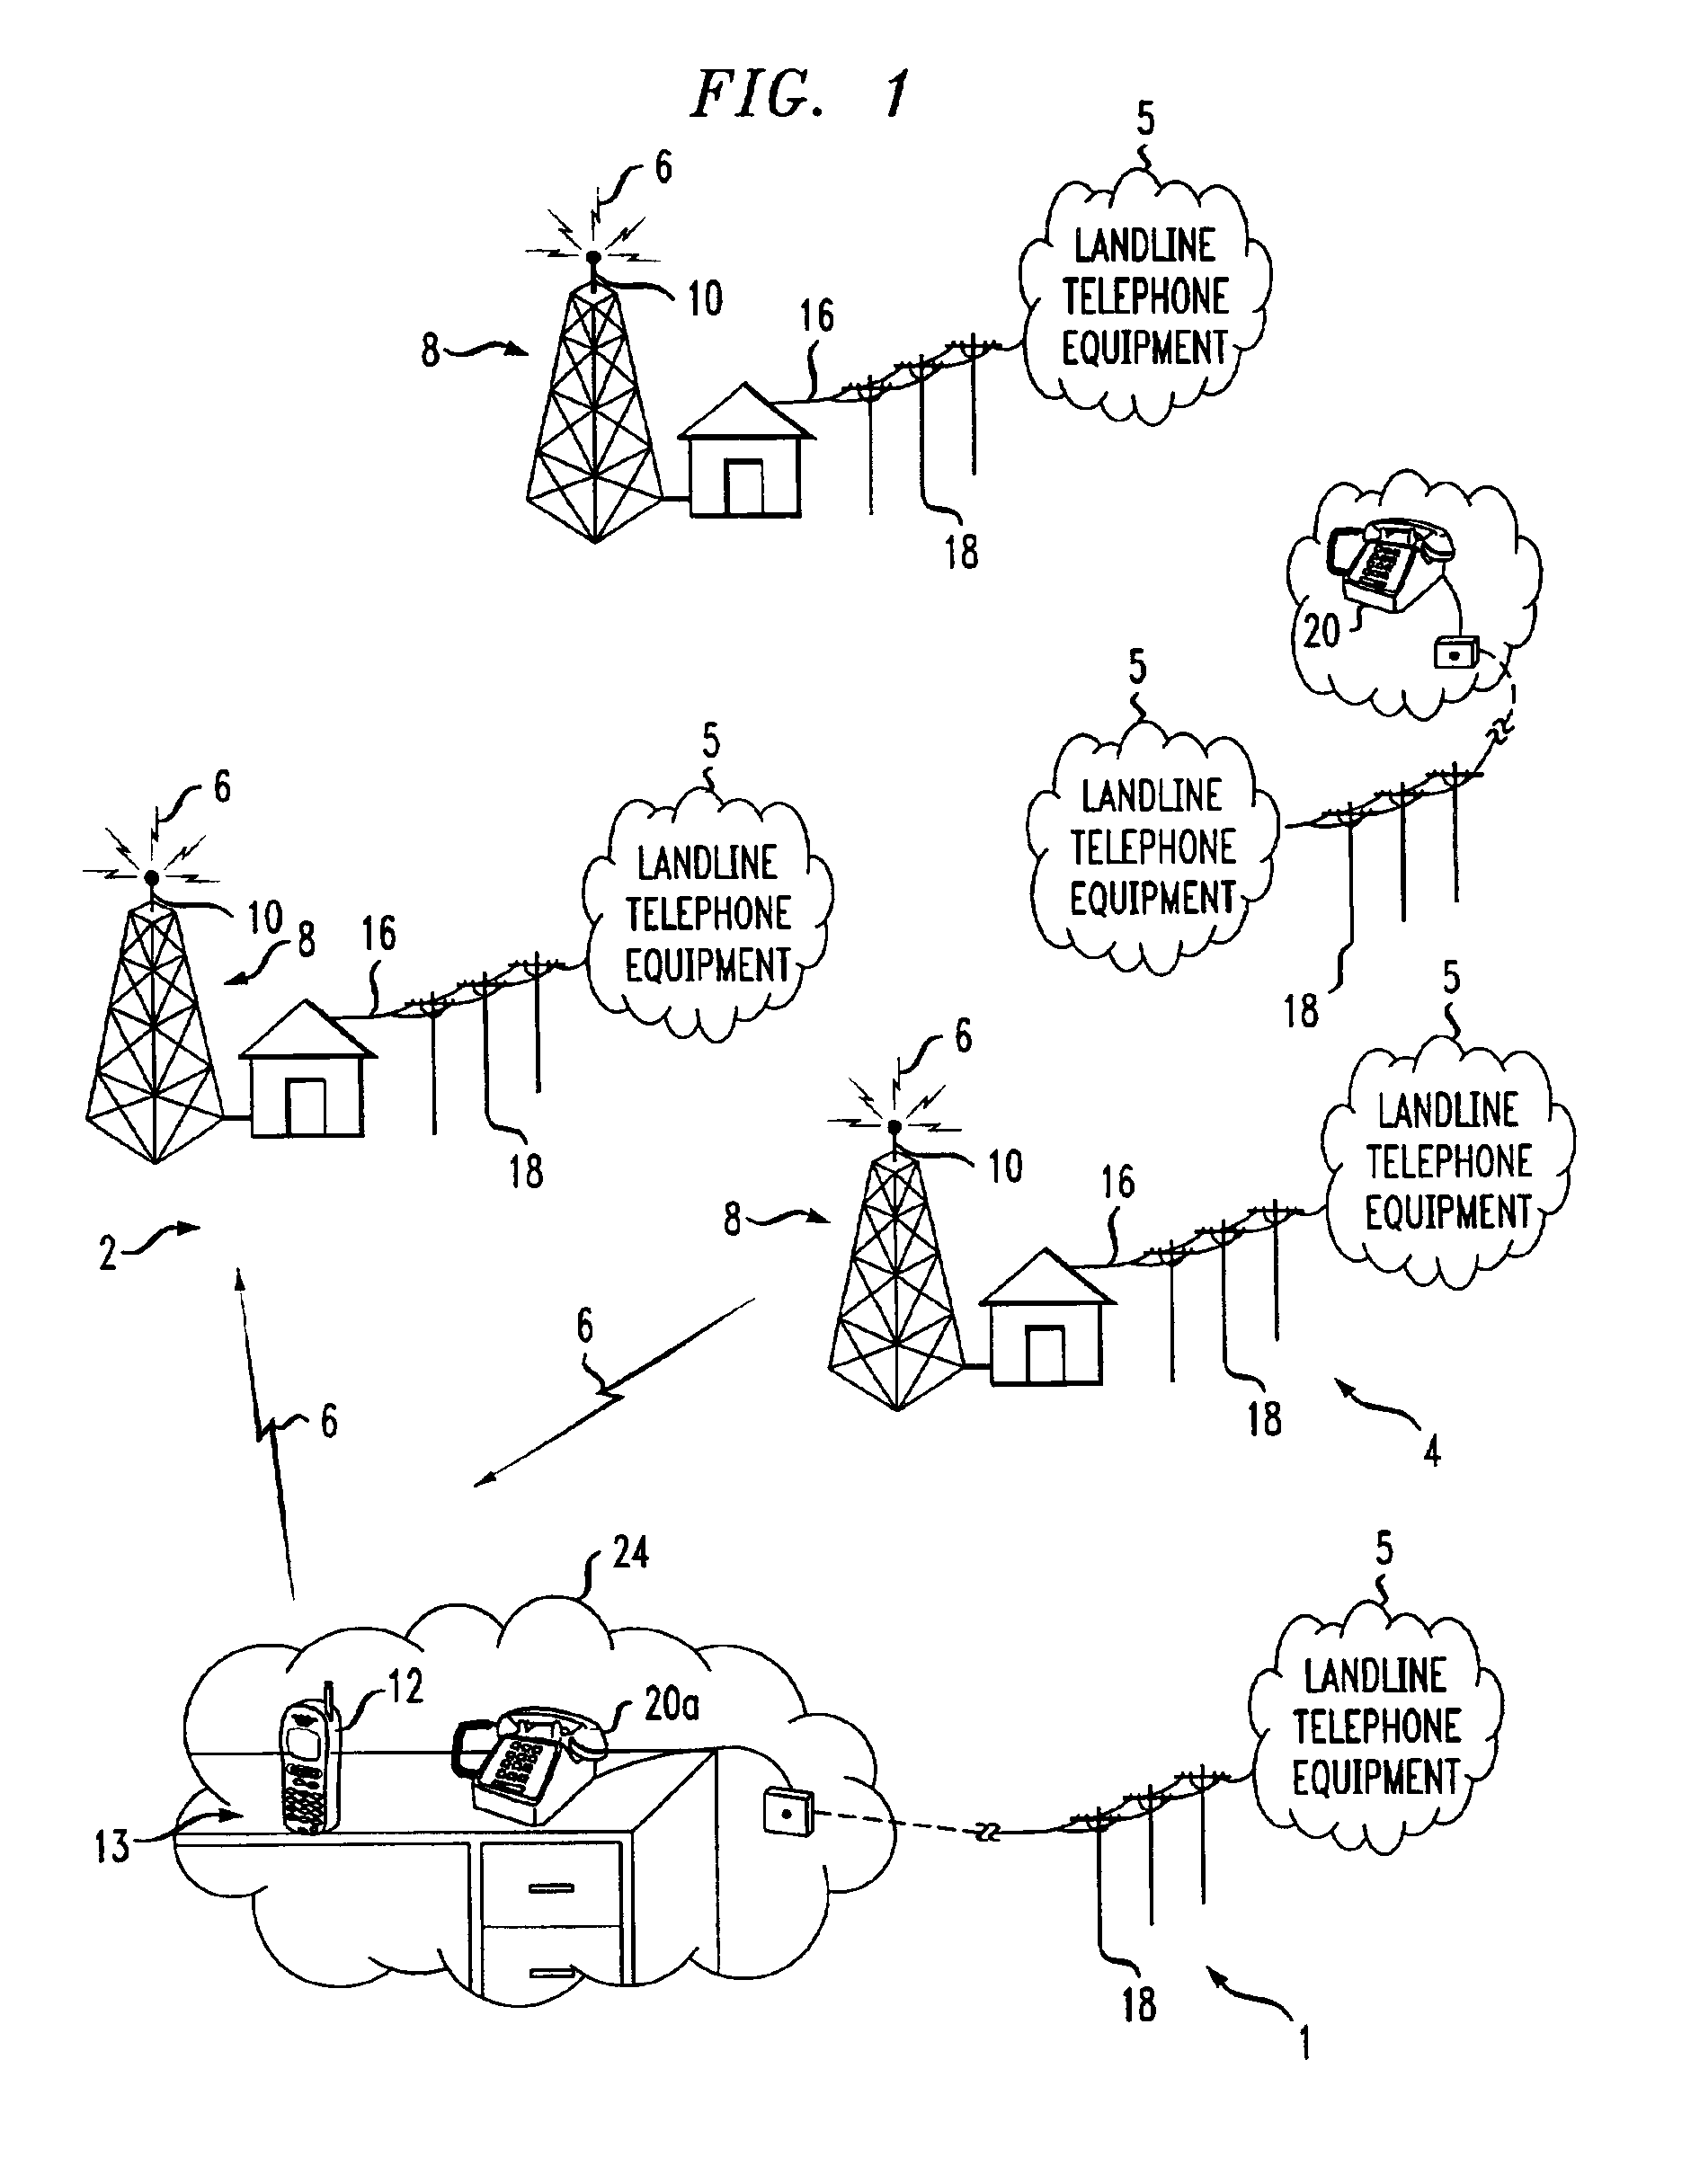 Method for call forwarding a call from a mobile telephone